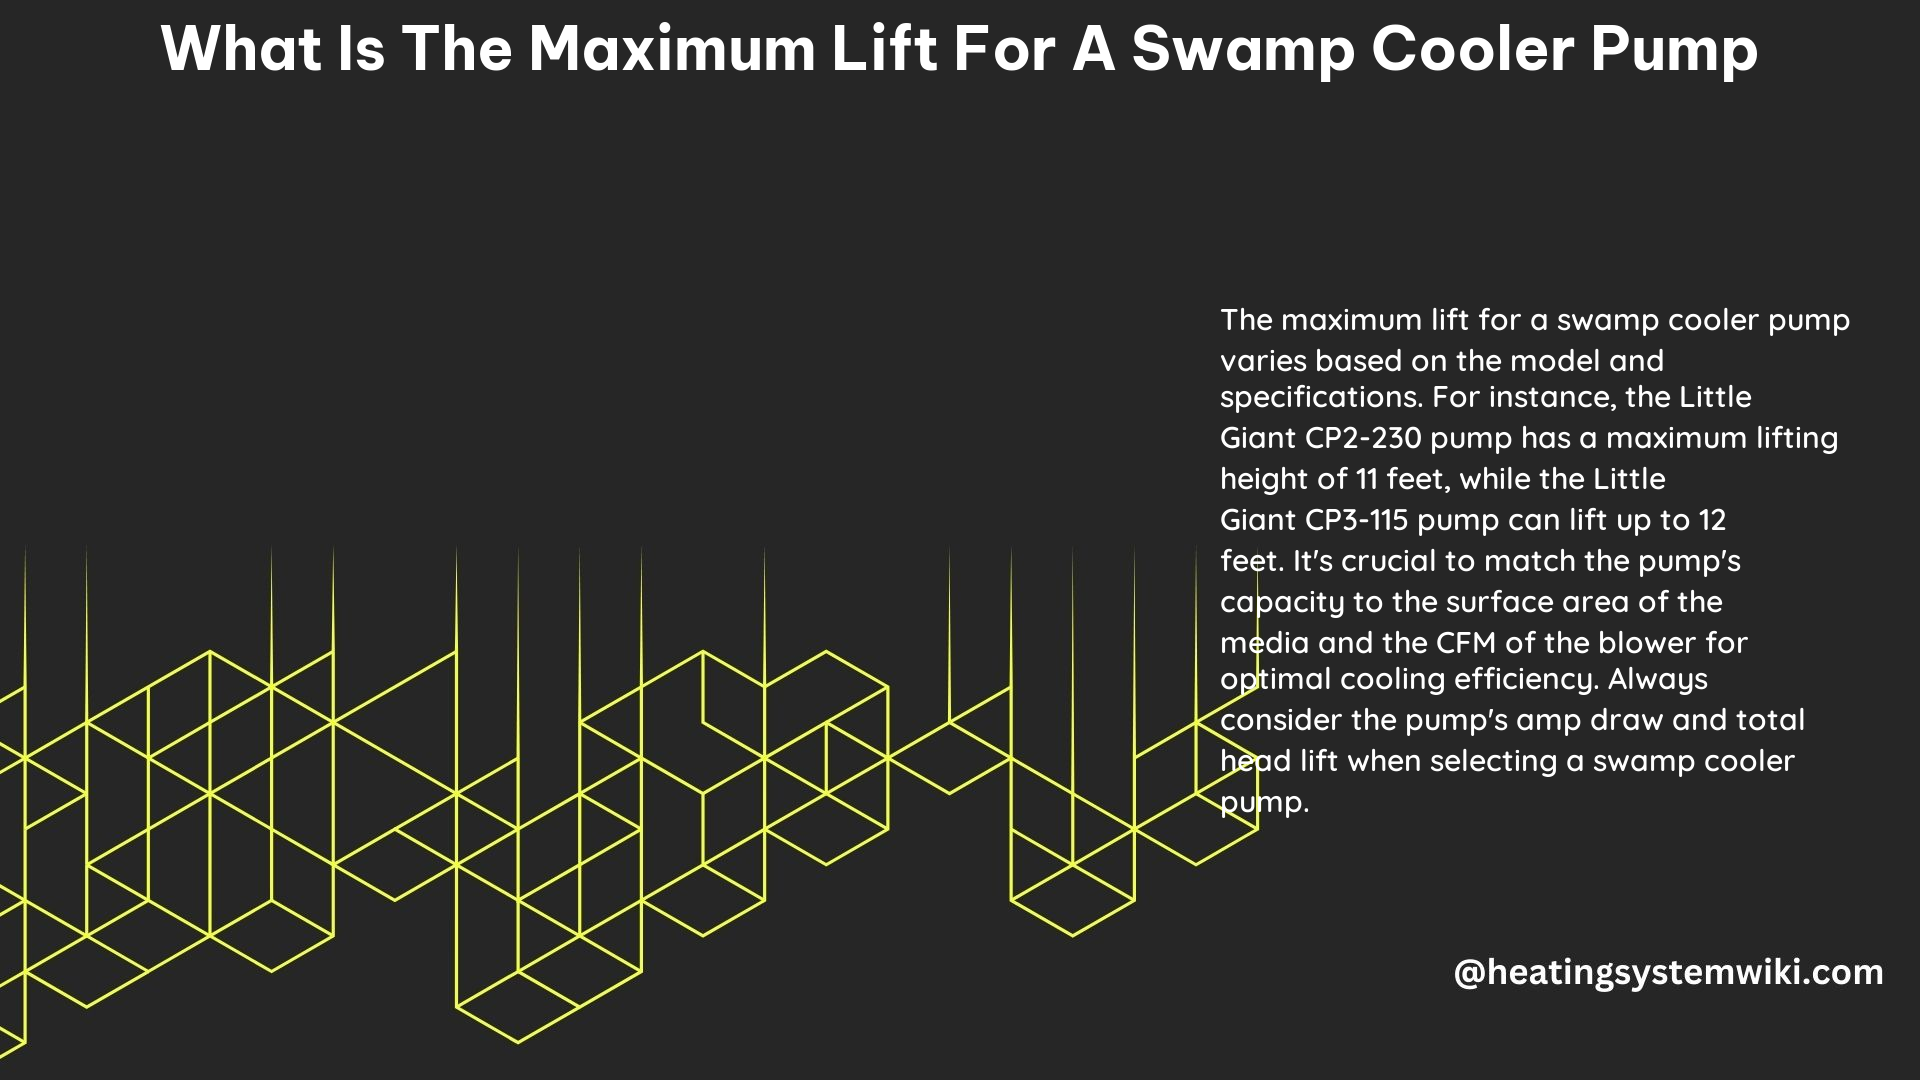 What Is the Maximum Lift for a Swamp Cooler Pump